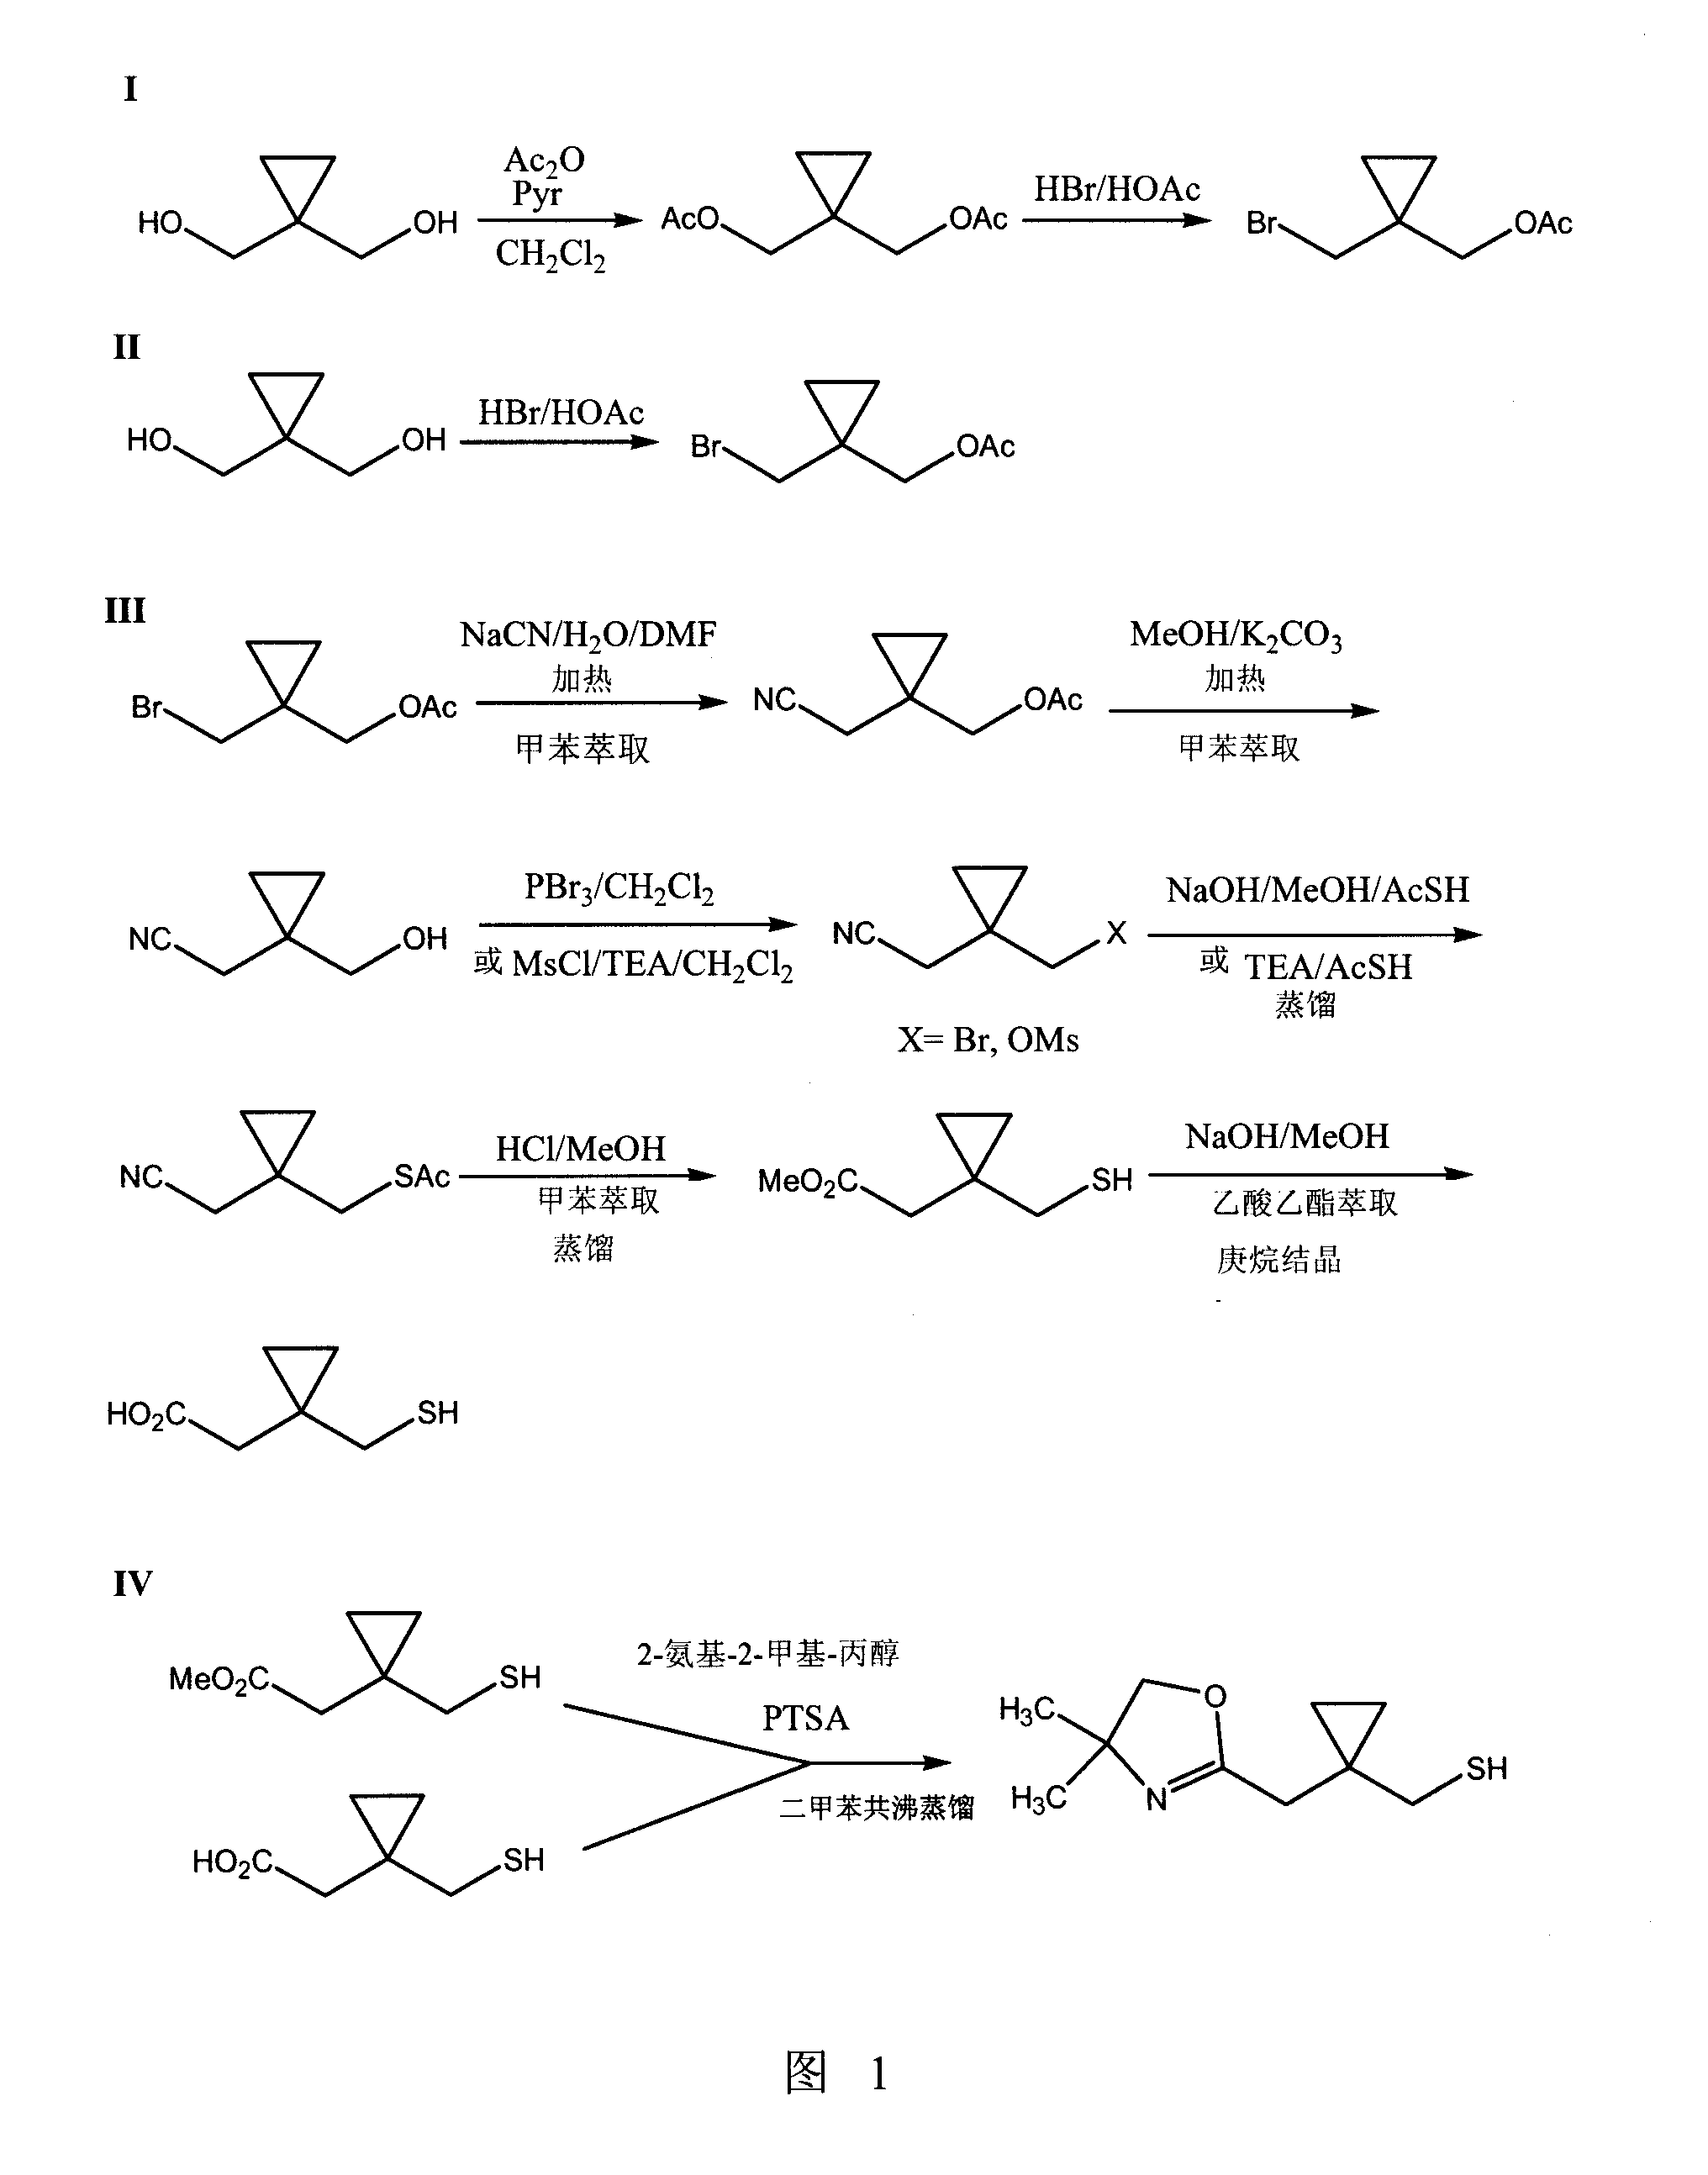 Method for preparing [1-(mercapto methyl) cyclopropyl] acetate and derivatives thereof